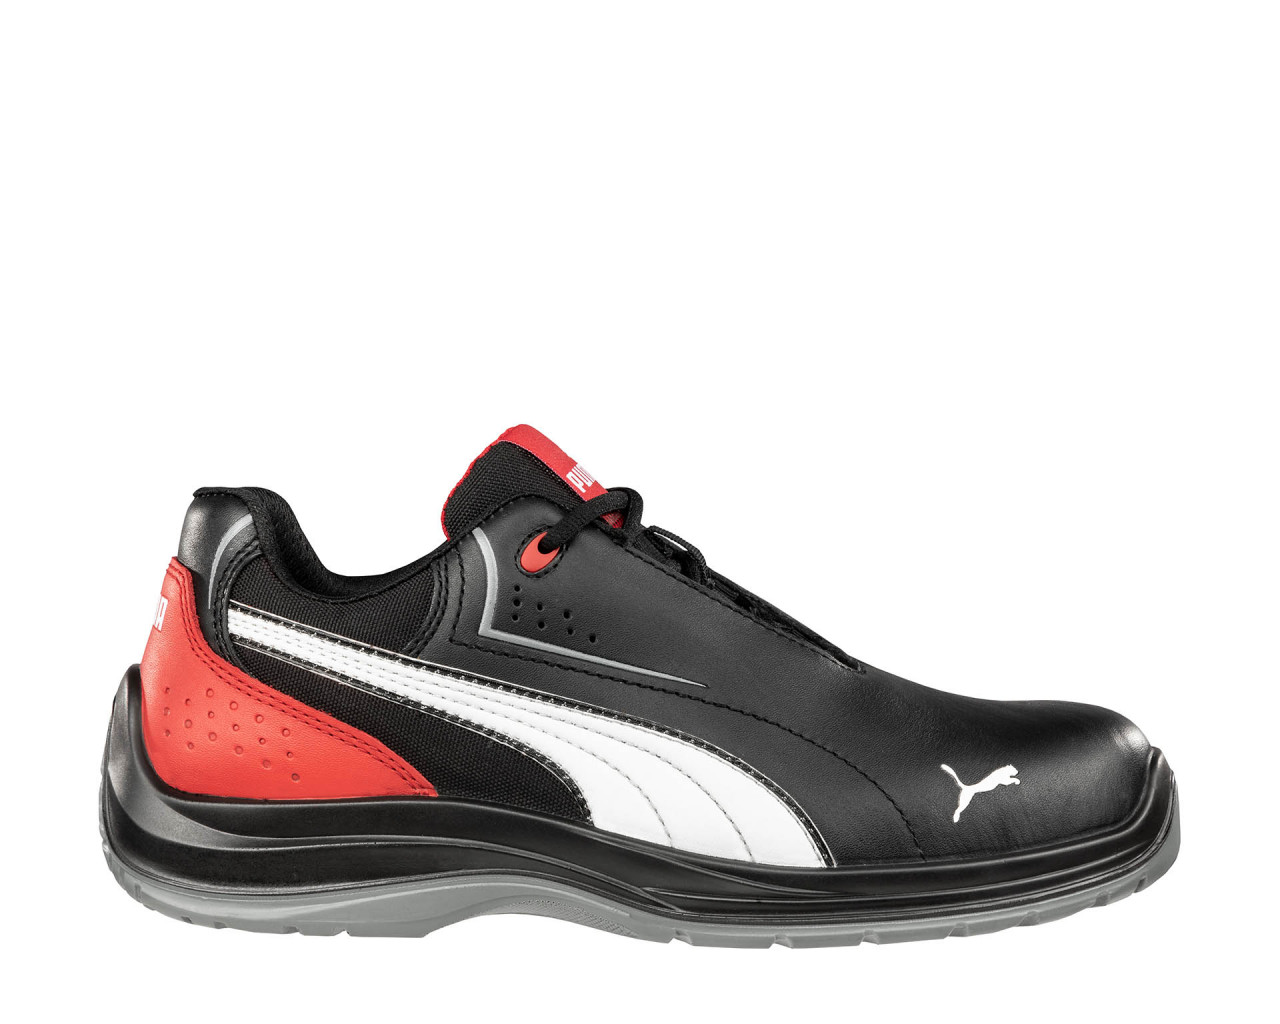 PUMA SAFETY TOURING BLACK LOW S3 ESD SRC